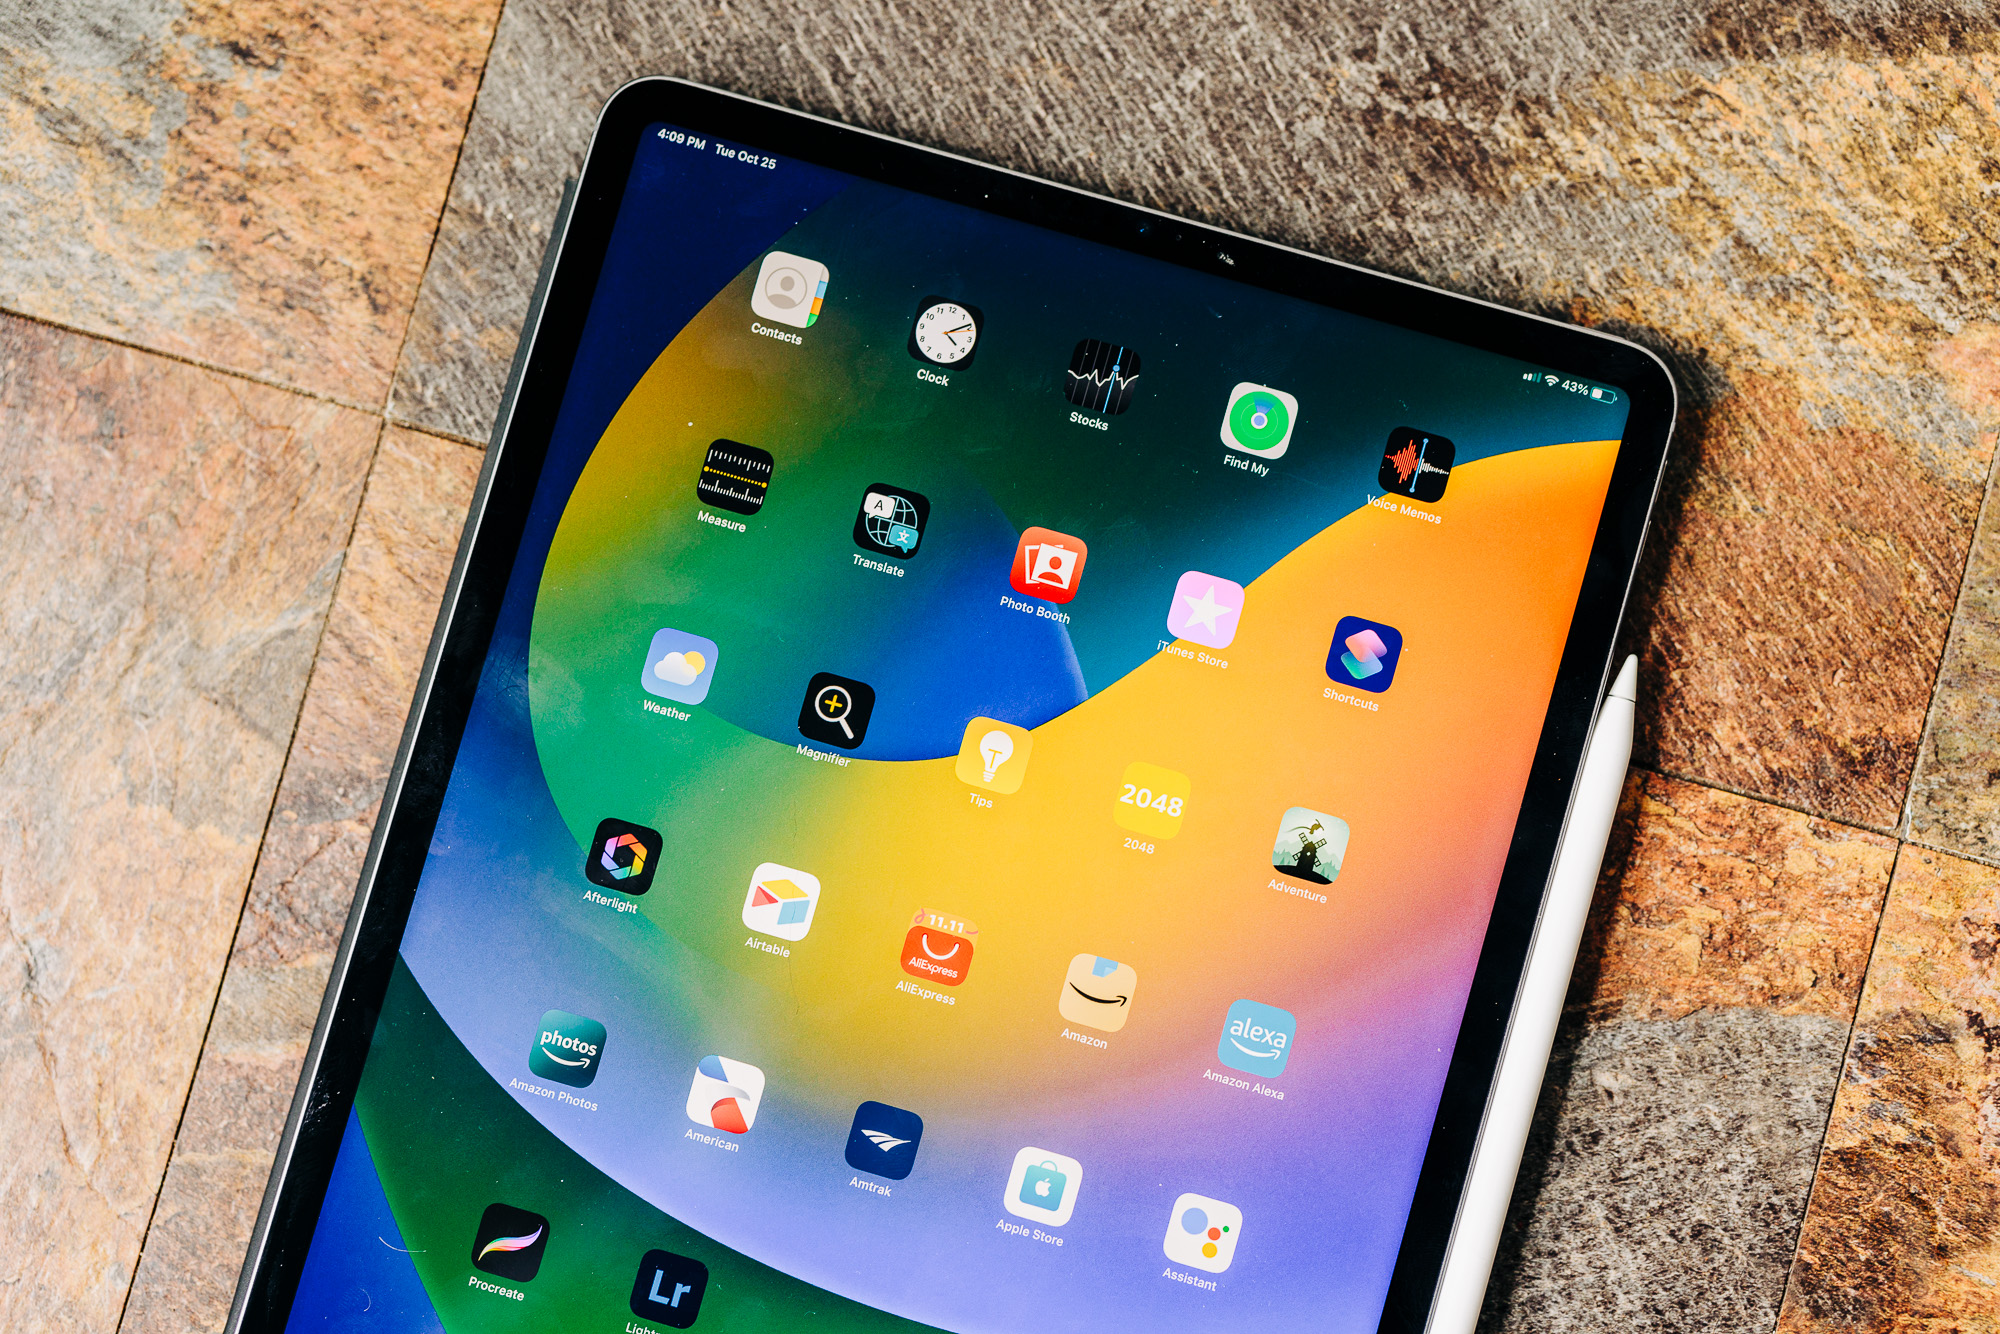 iPad Pro 12.9-inch M1 review